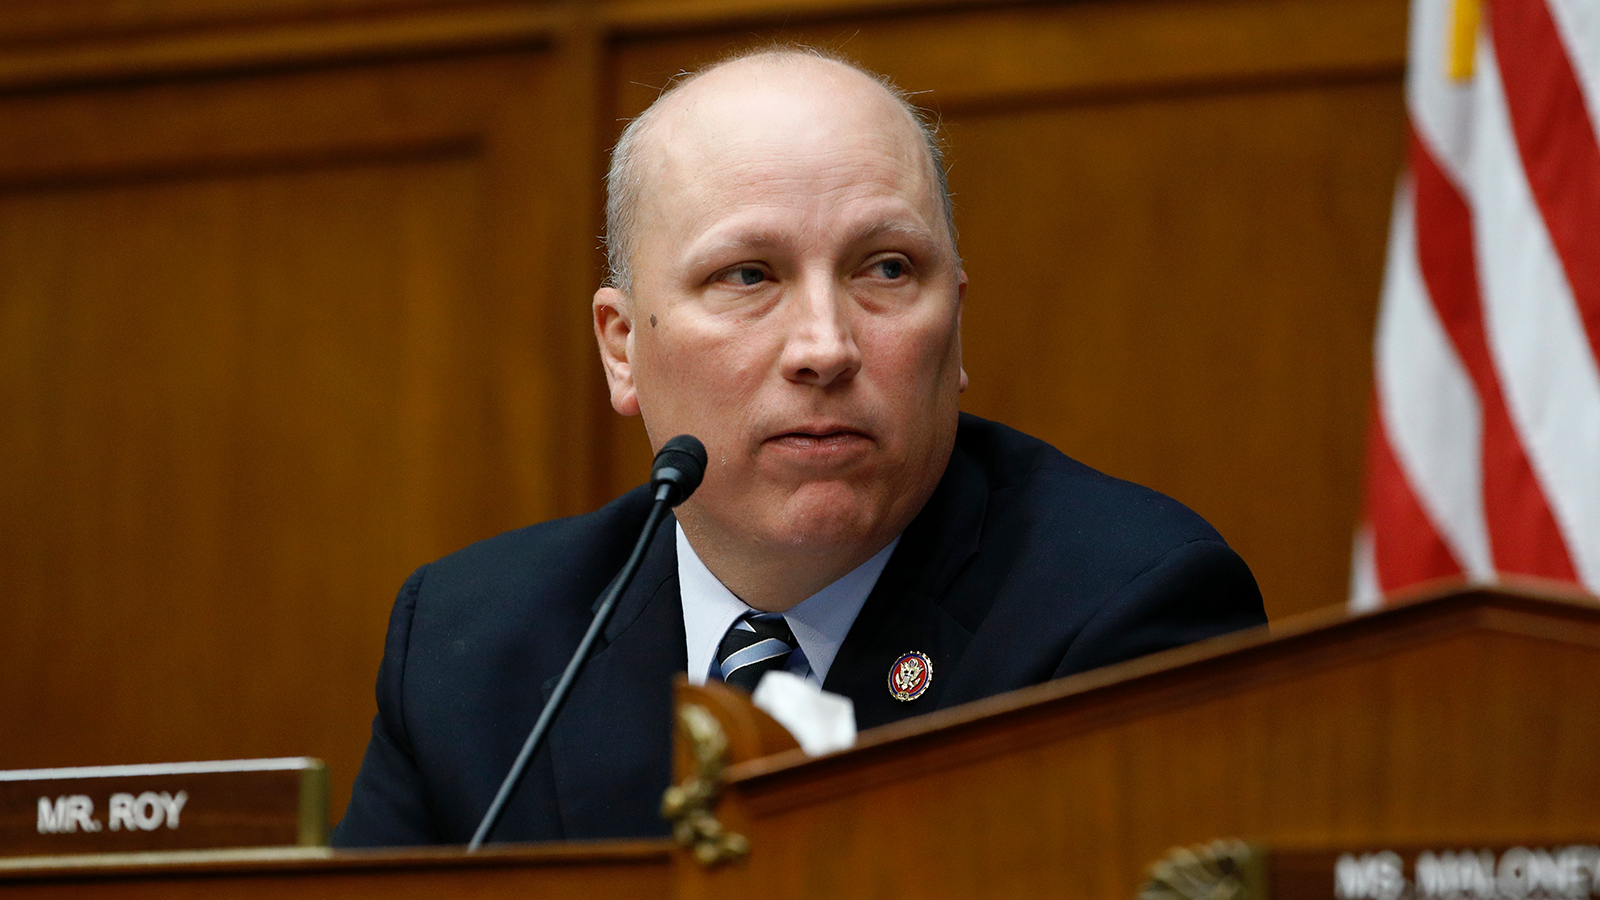 Rep. Chip Roy, R-Texas, speaks during a hearing on preparedness for and response to the coronavirus outbreak on Capitol Hill in Washington, Wednesday, March 11.